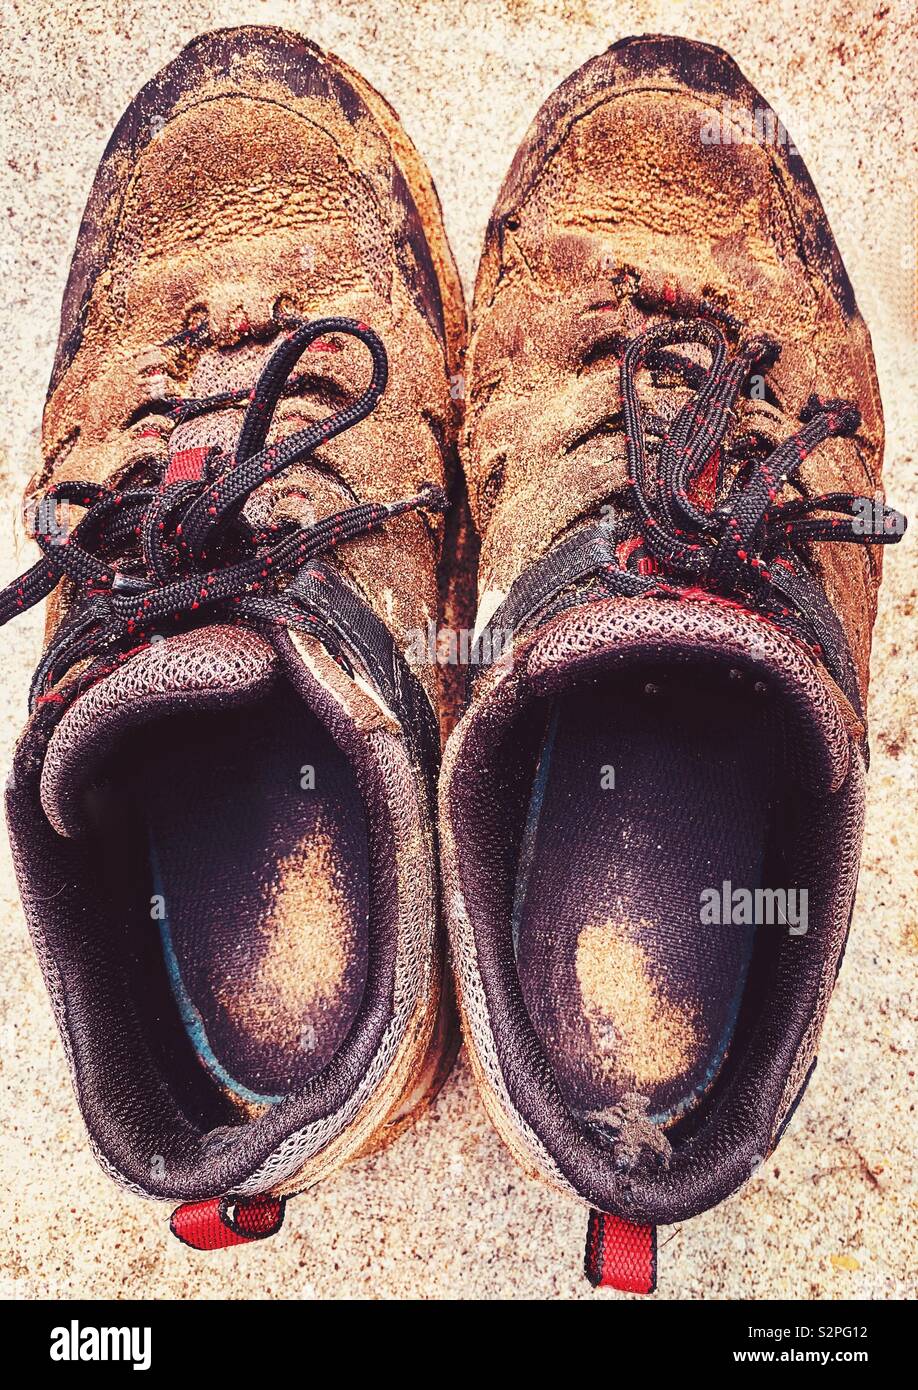 Pair of walking shoes covered with sand after walk on beach Stock Photo -  Alamy